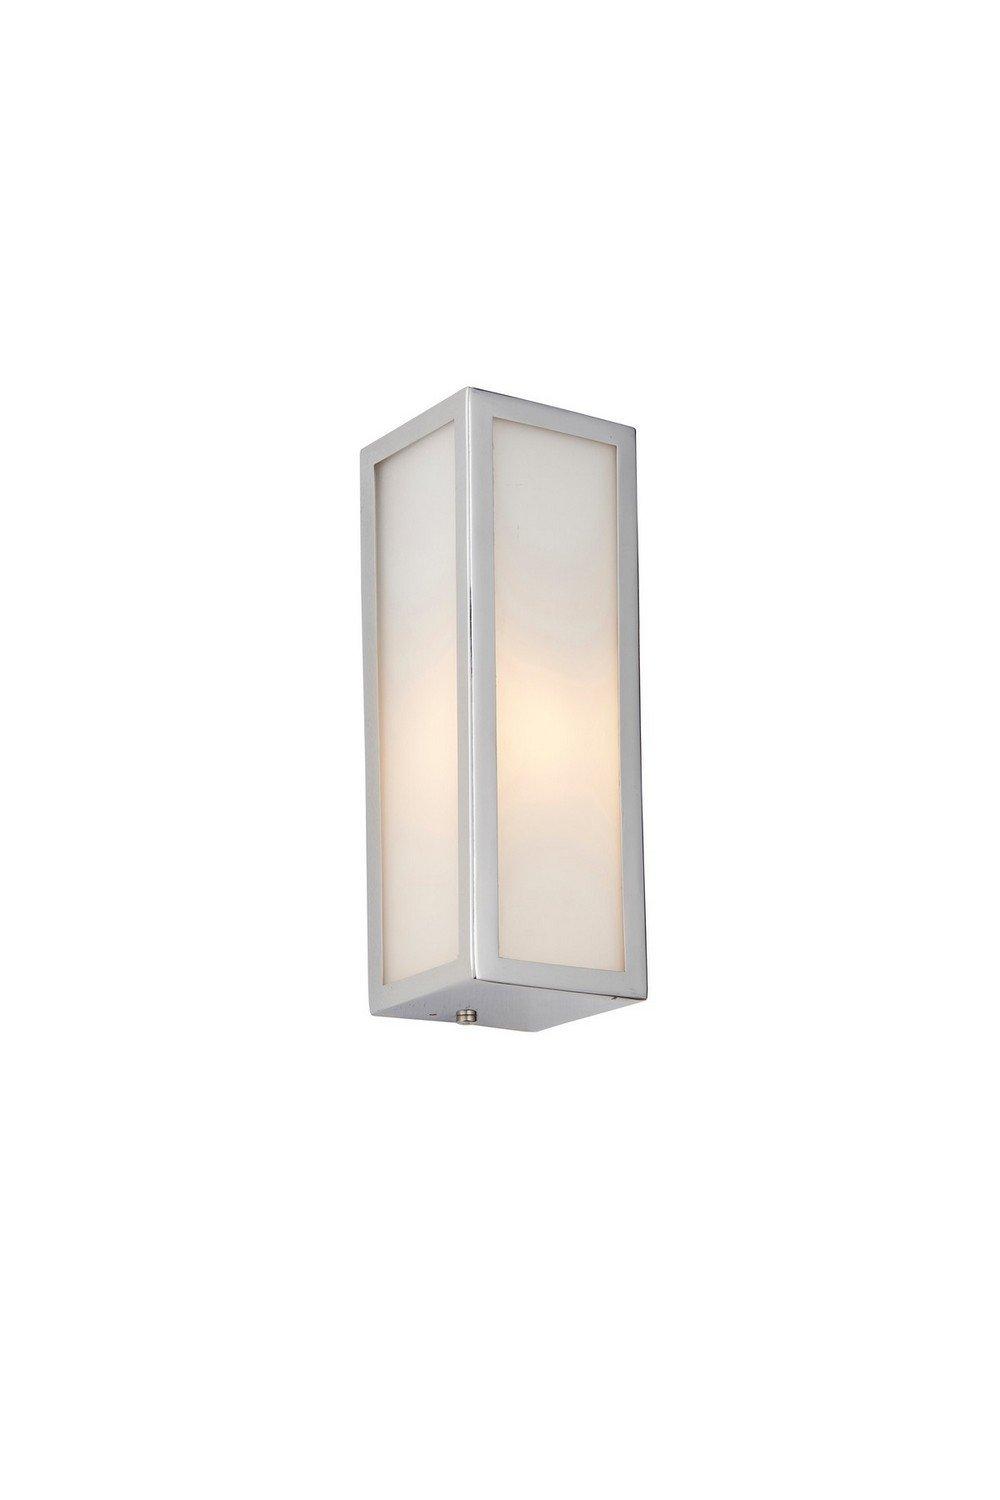 Newham Outdoor Contemporary Wall Light Chrome Frosted Glass